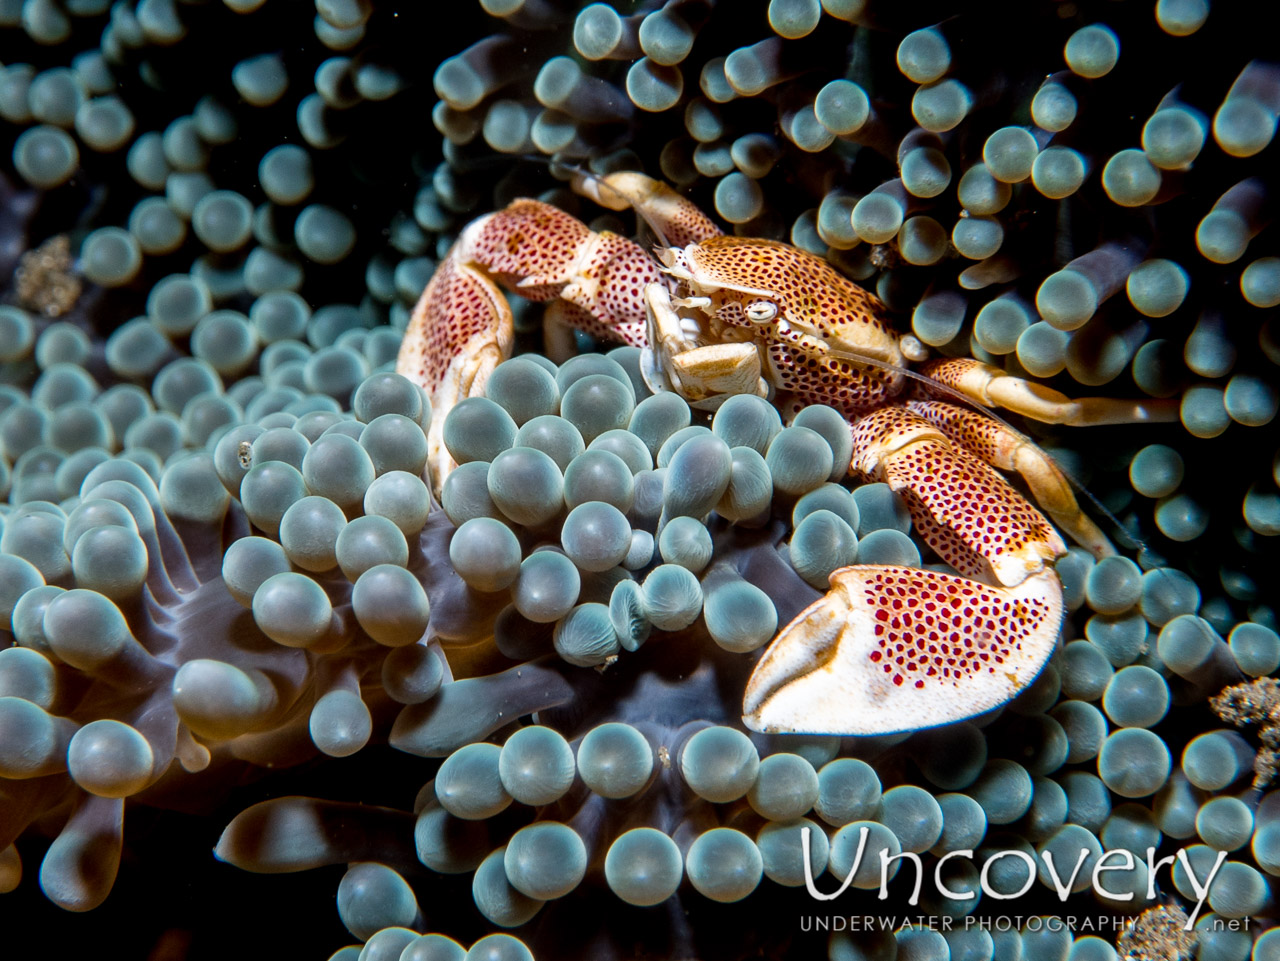 Spotted Porcelain Crab (neopetrolisthes Maculatus), photo taken in Indonesia, North Sulawesi, Lembeh Strait, Makawide 3